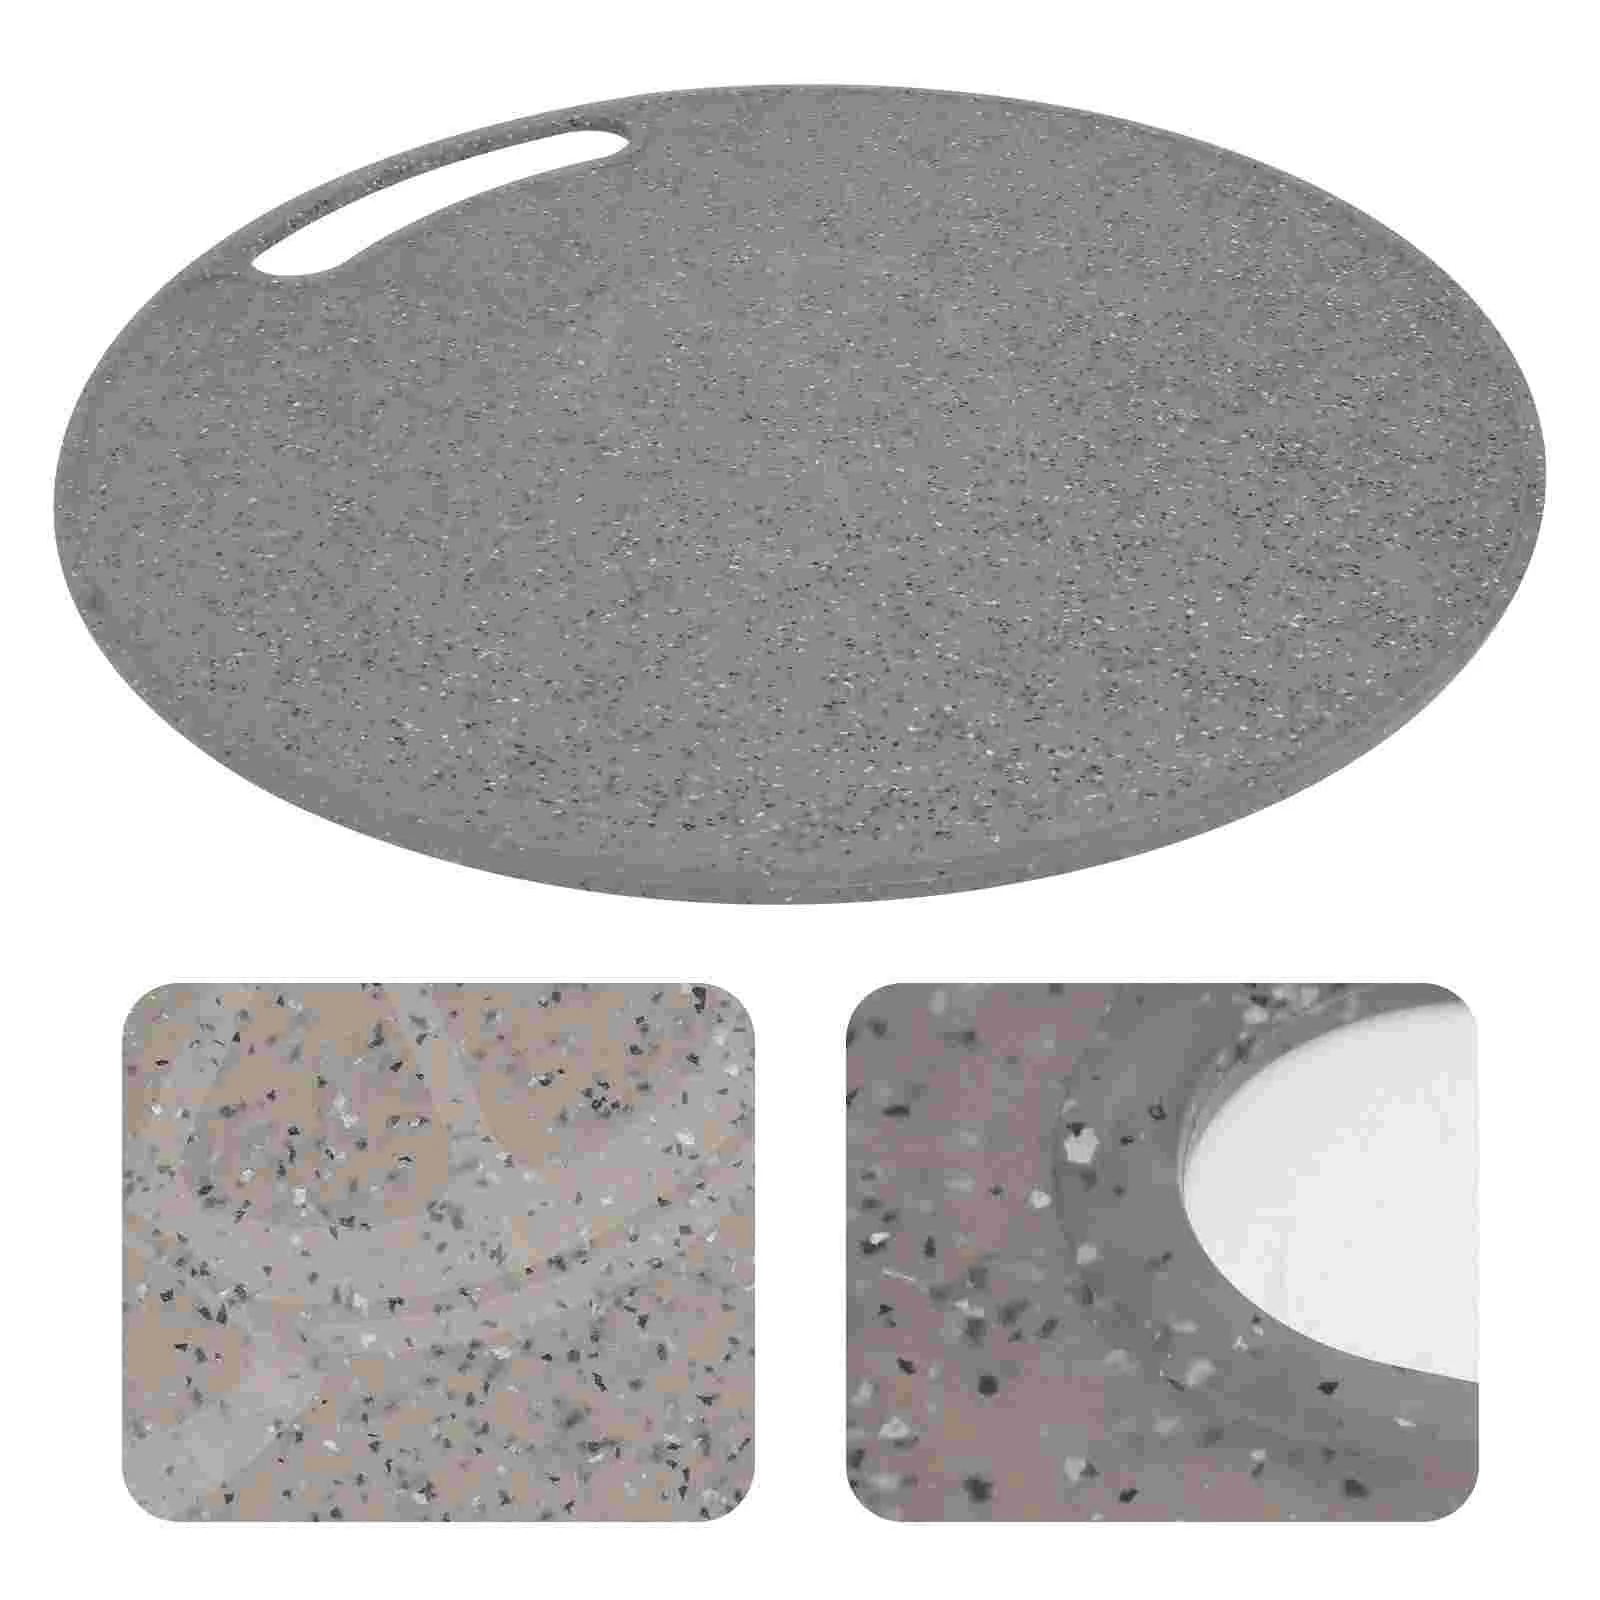 

Board Cutting Chopping Plastic Fruit Vegetable Boards Round Kitchen Marble Block Mats Meat Handle Sheets Granite Safe Dishwasher